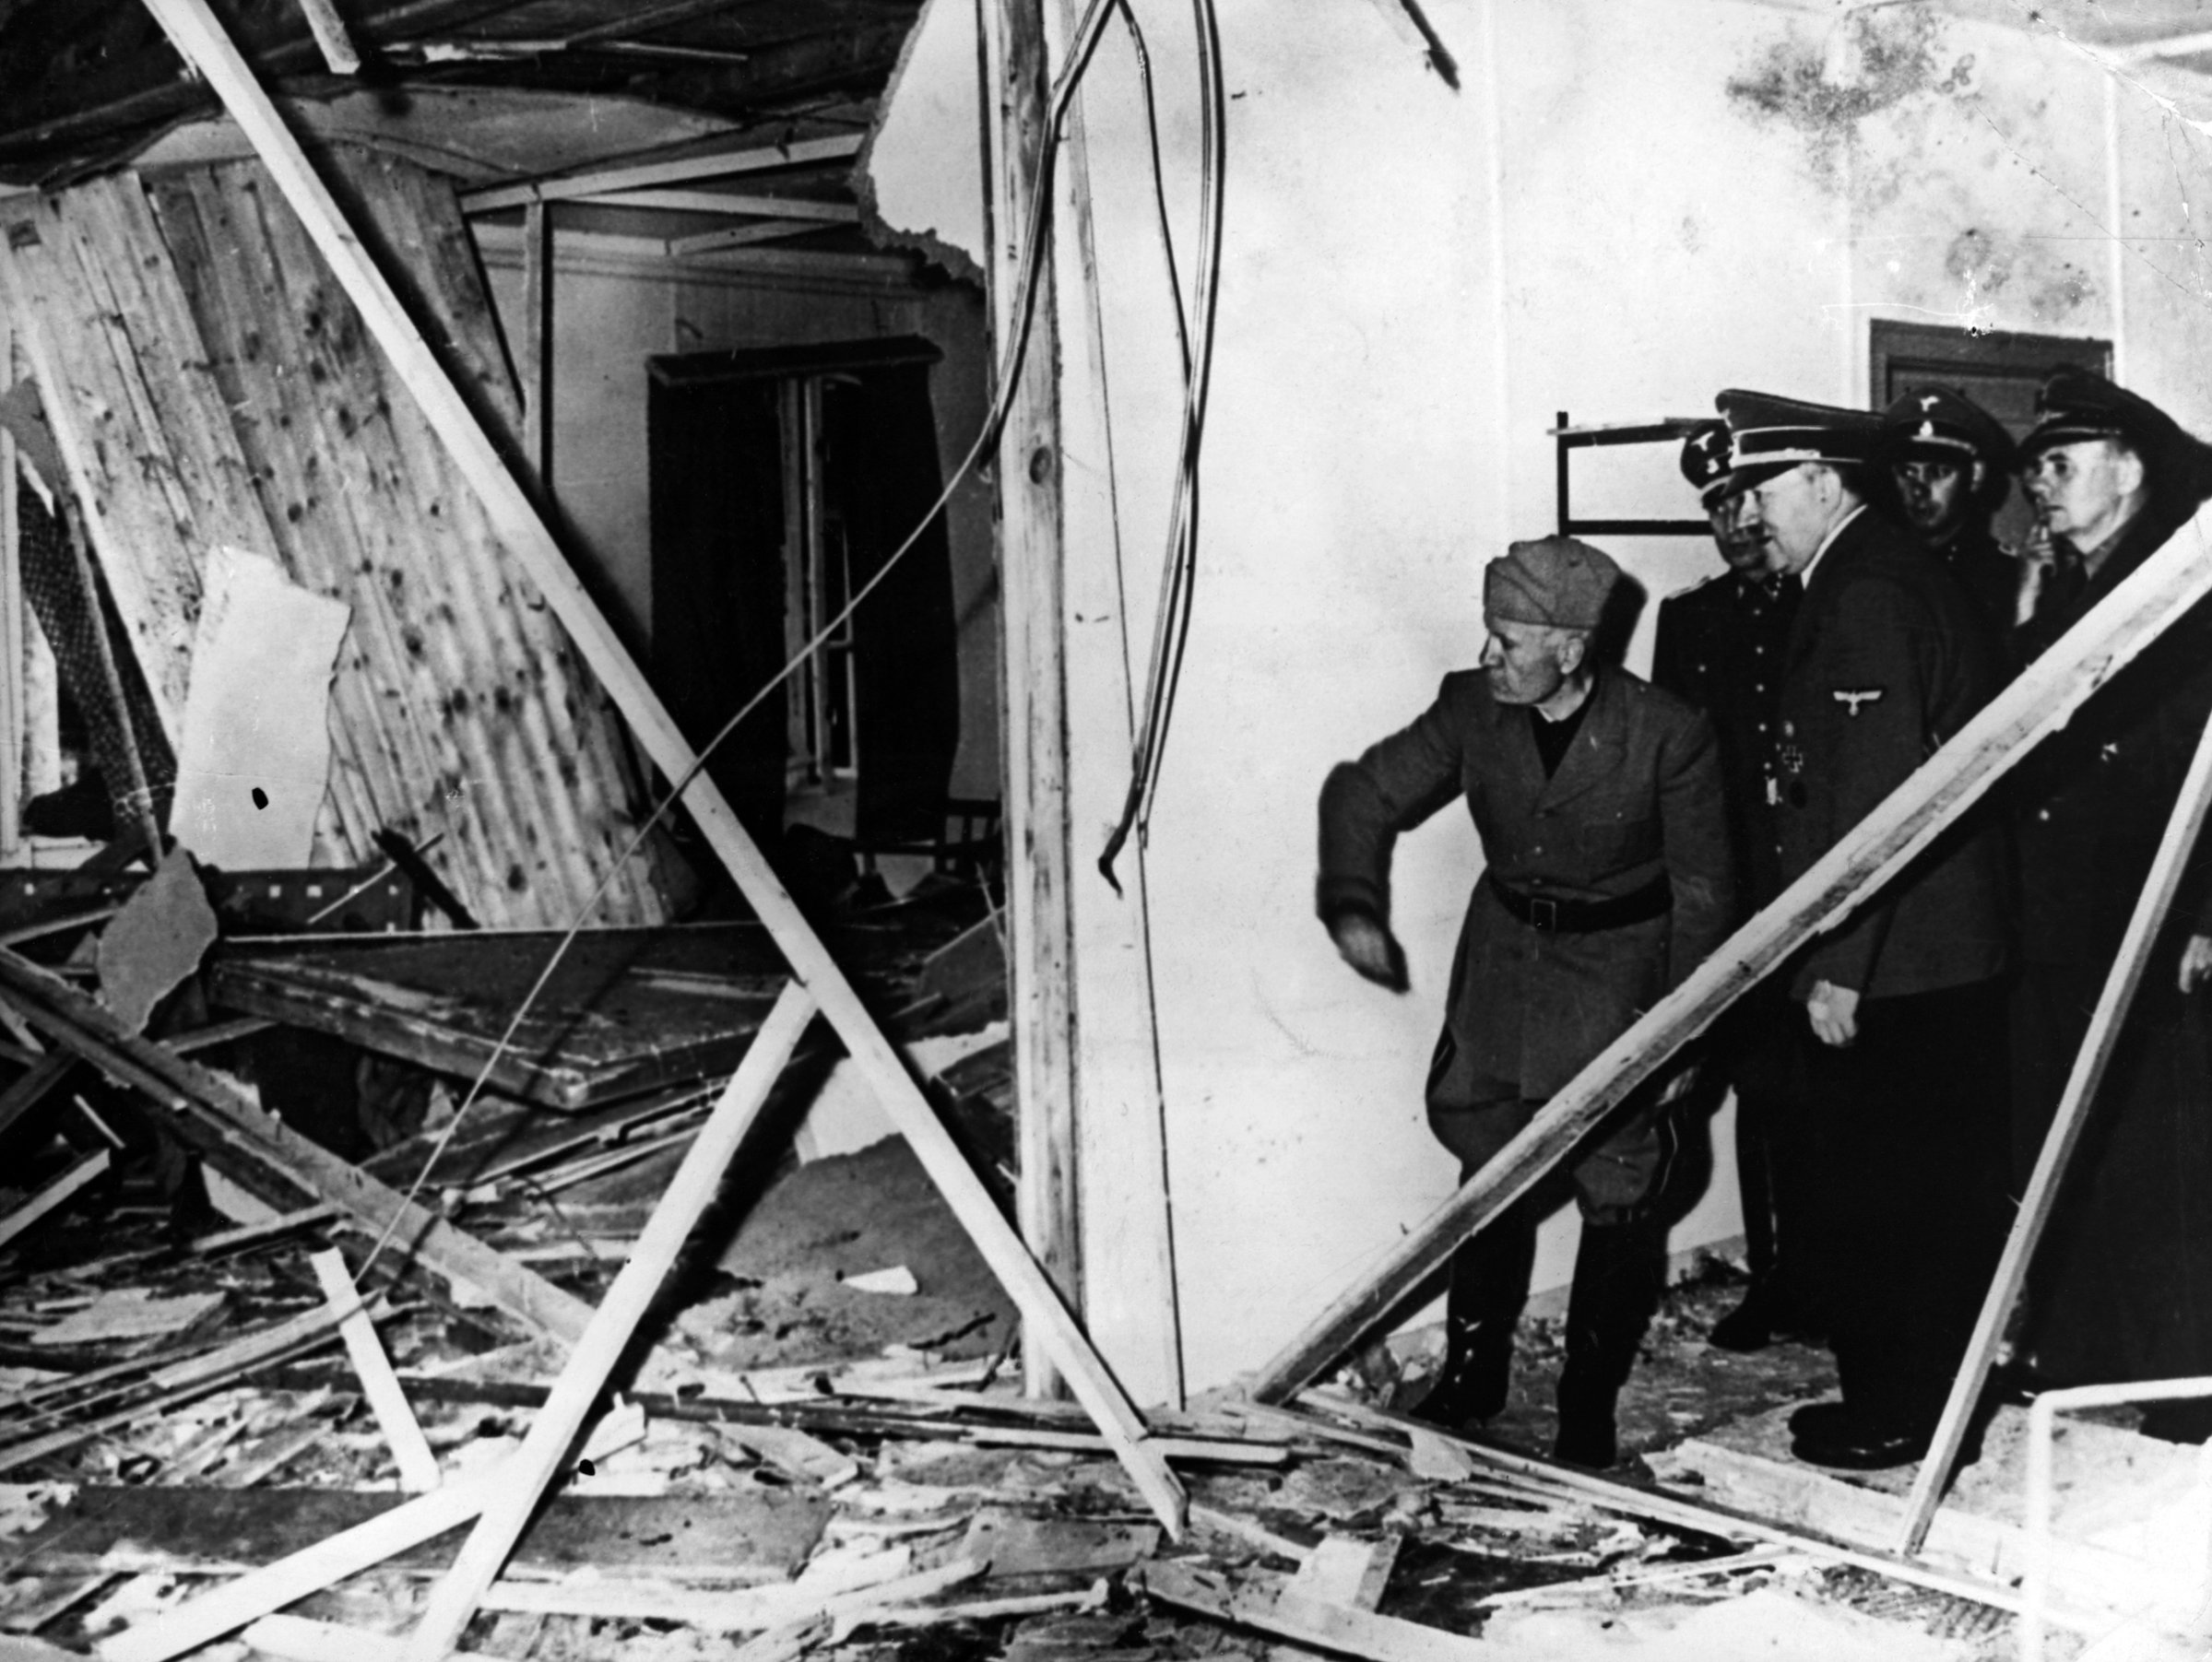 Hitler and Mussolini at Bombed Headquarters